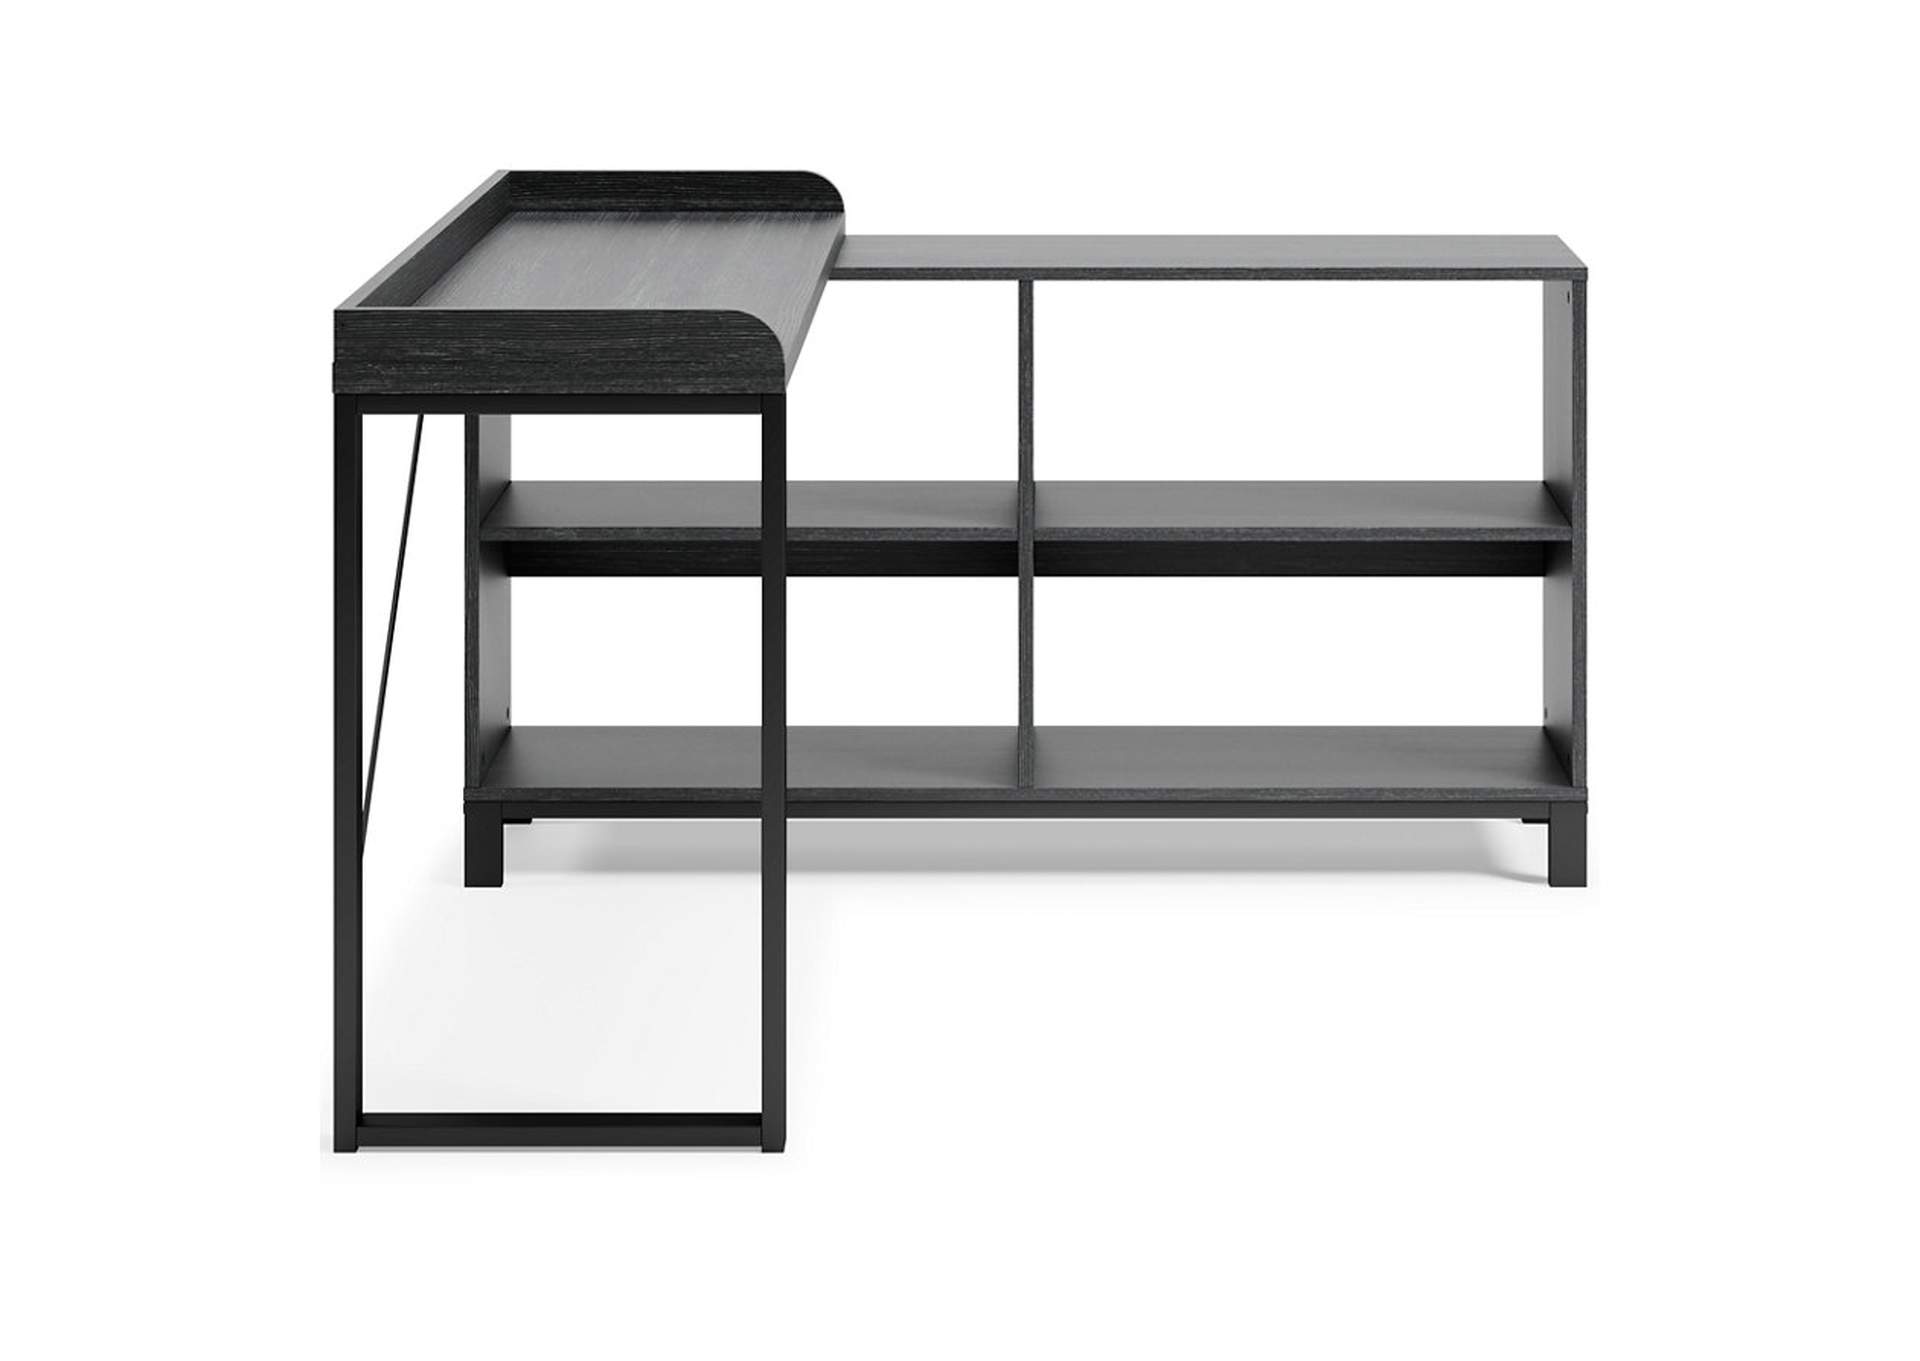 Yarlow Home Office L-Desk,Signature Design By Ashley